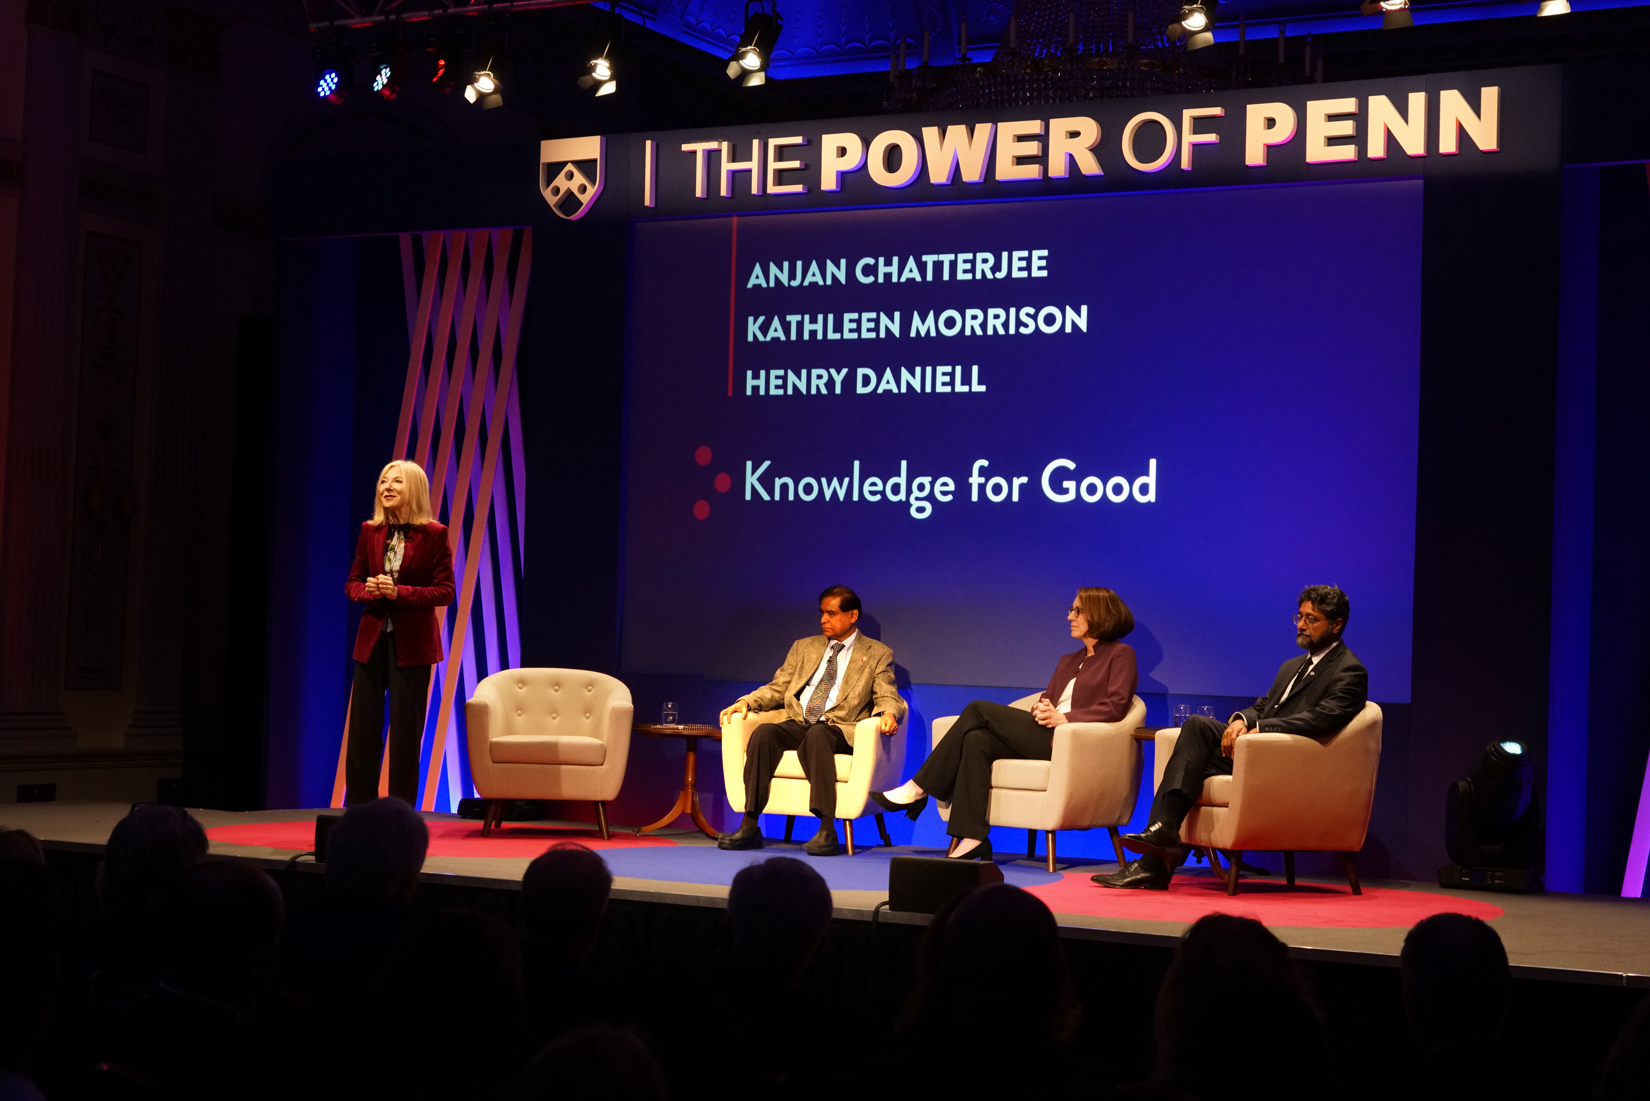 President Gutmann speaking on stage at Power of Penn event in London